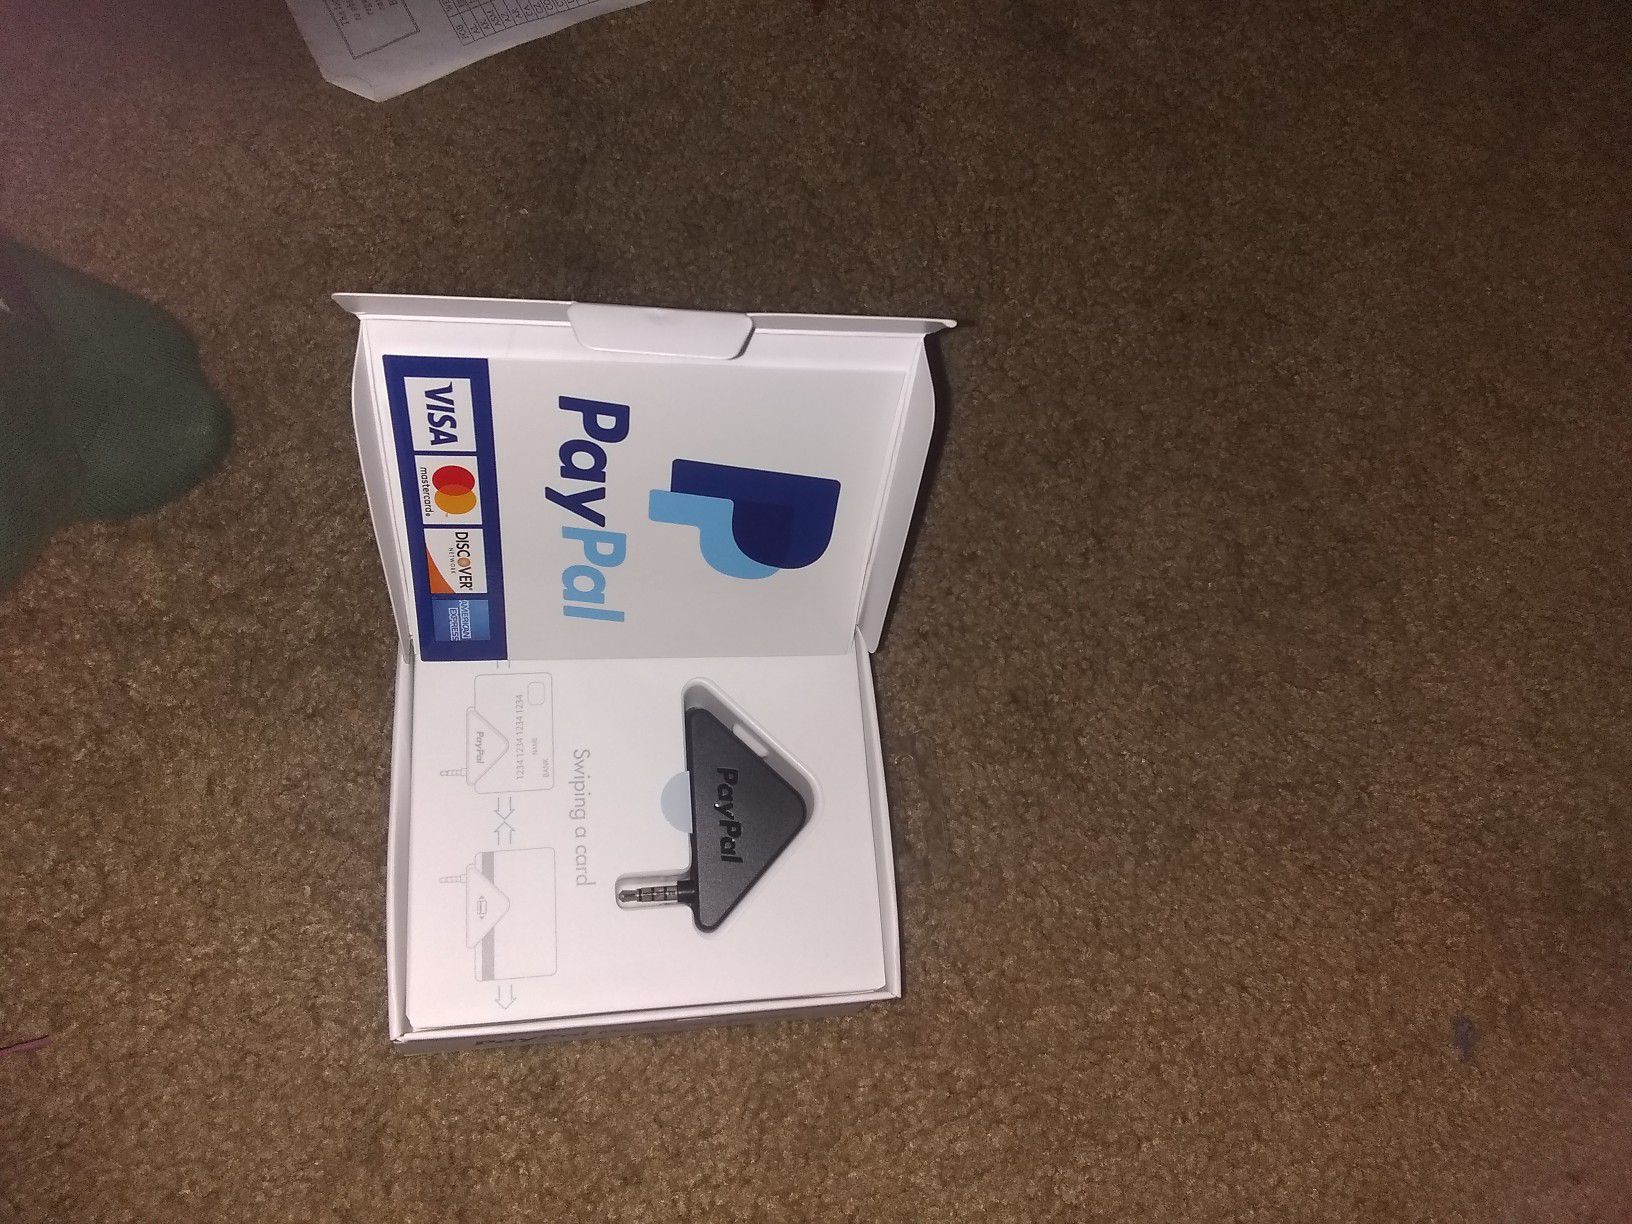 PAYPAL MOBILE CARD READER